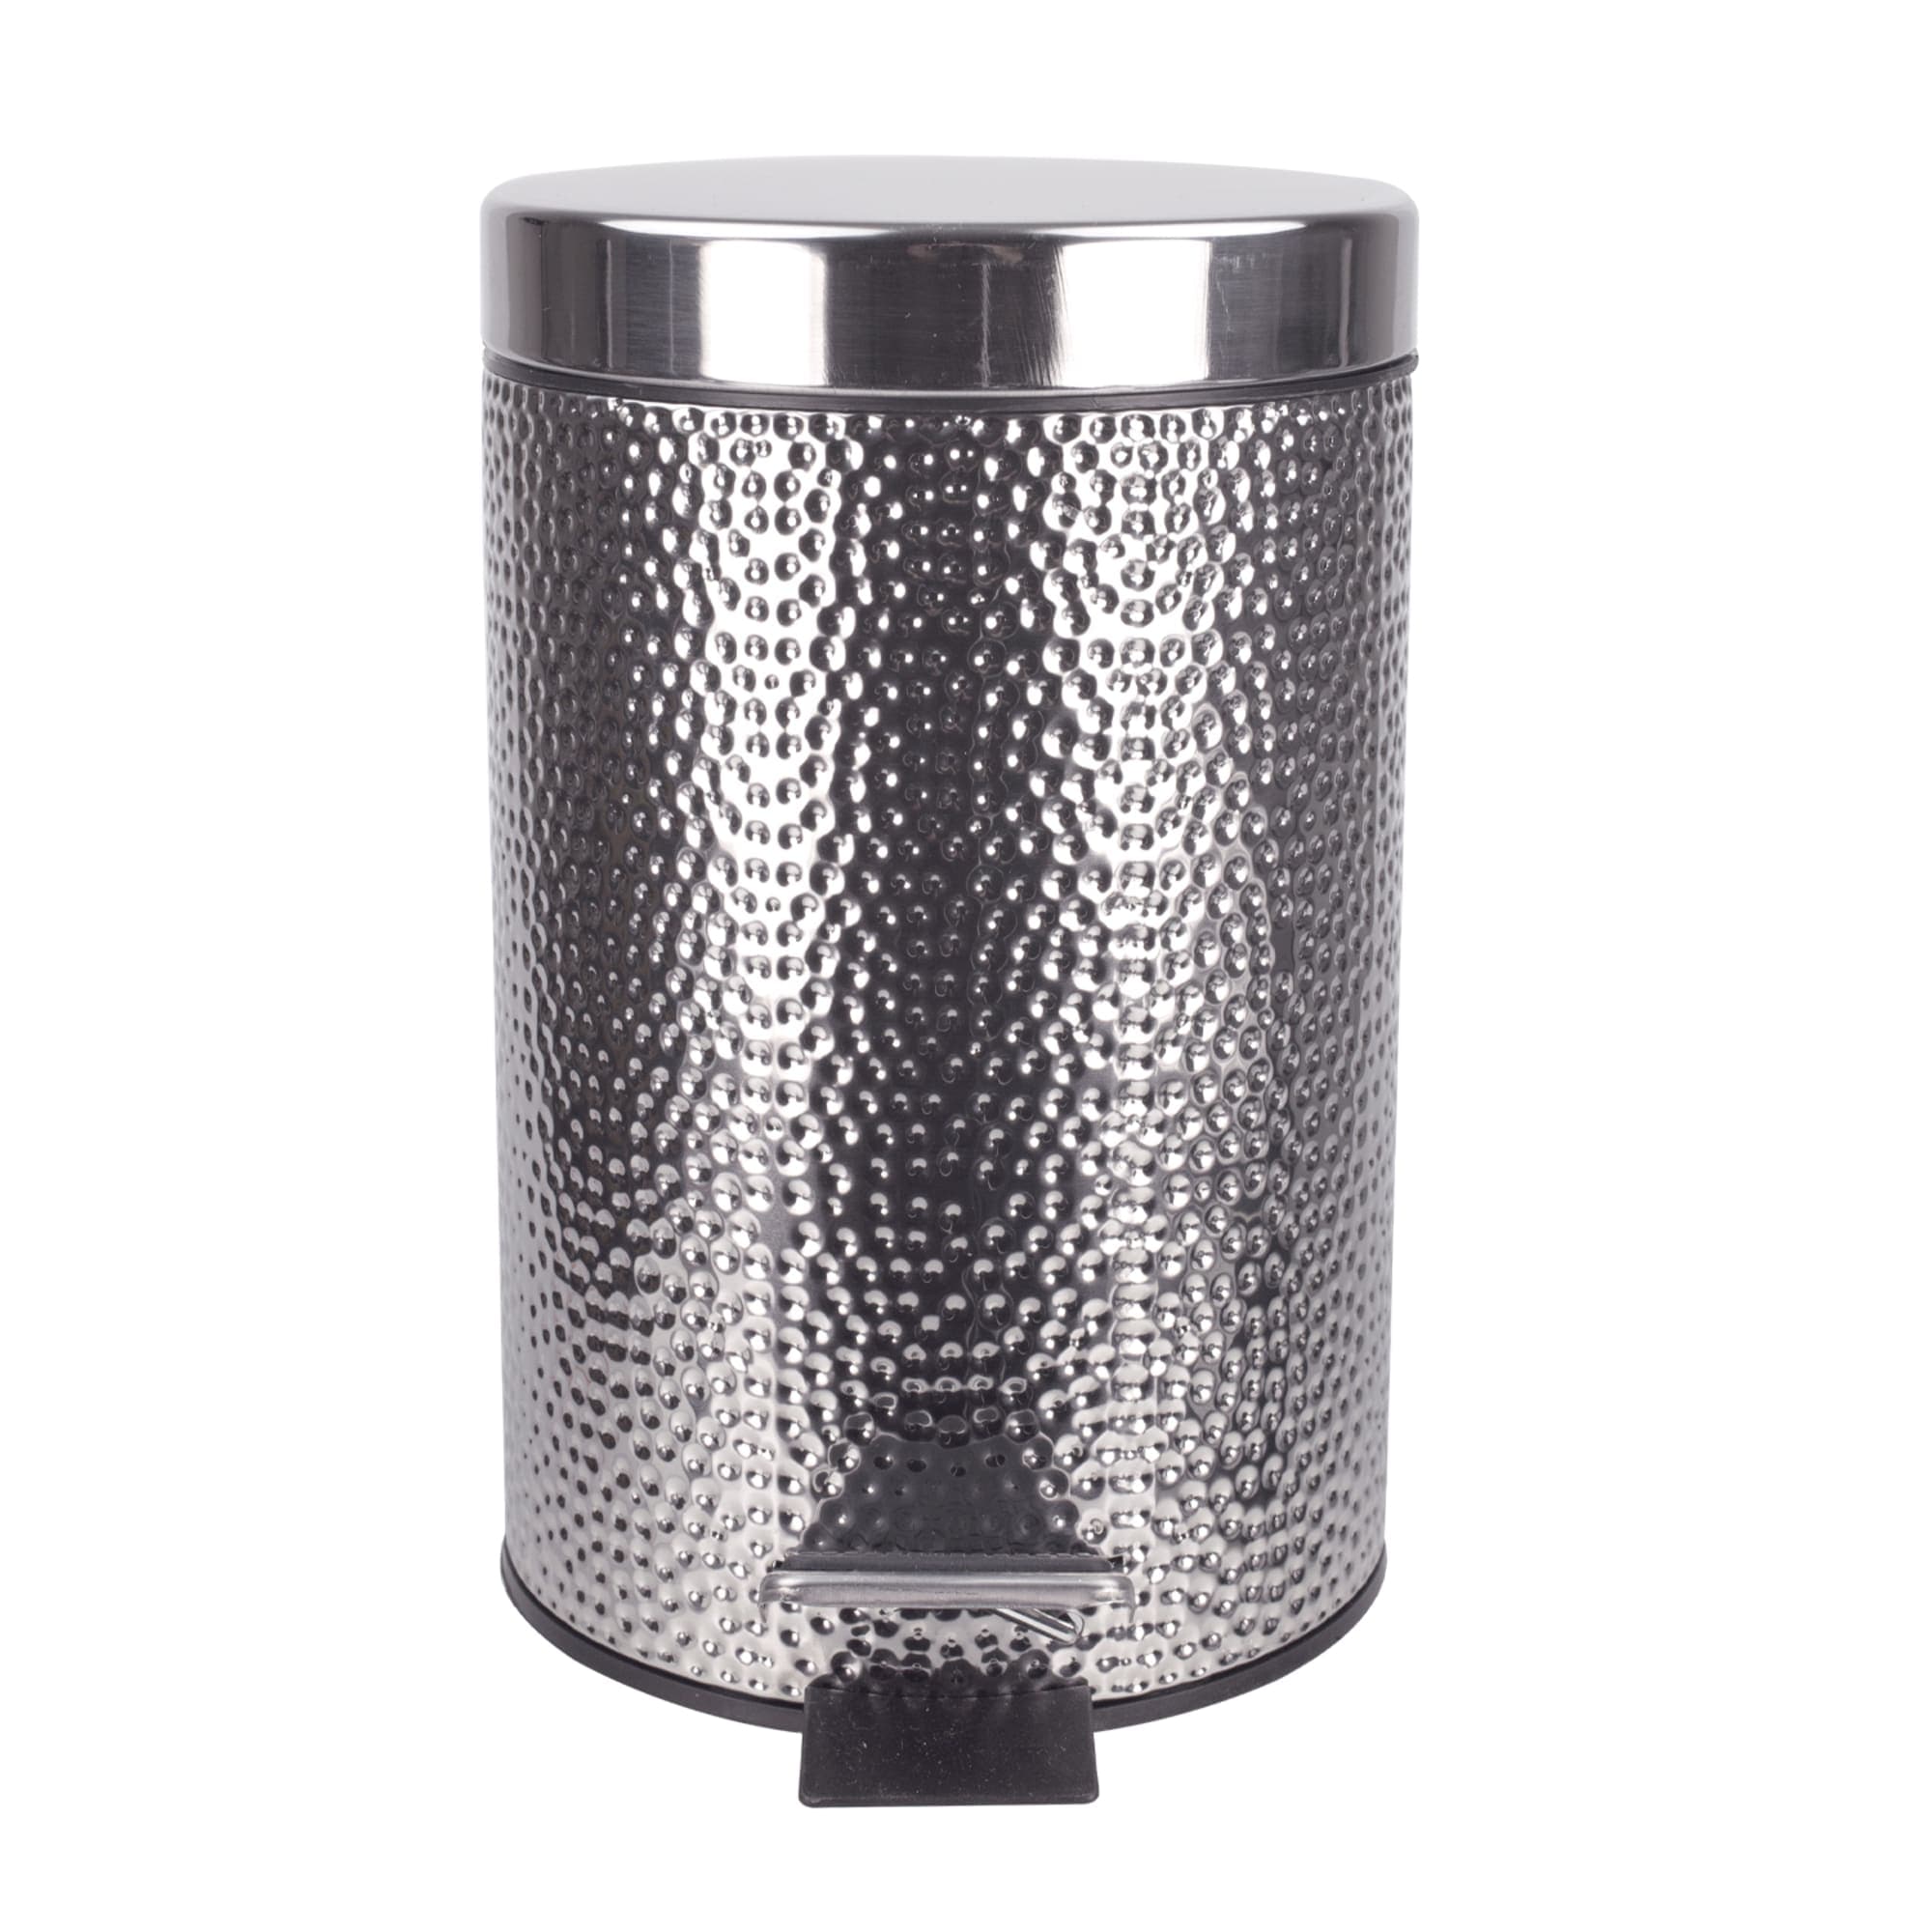 Home Basics Hammered Stainless Steel Waste Bin $8.00 EACH, CASE PACK OF 6